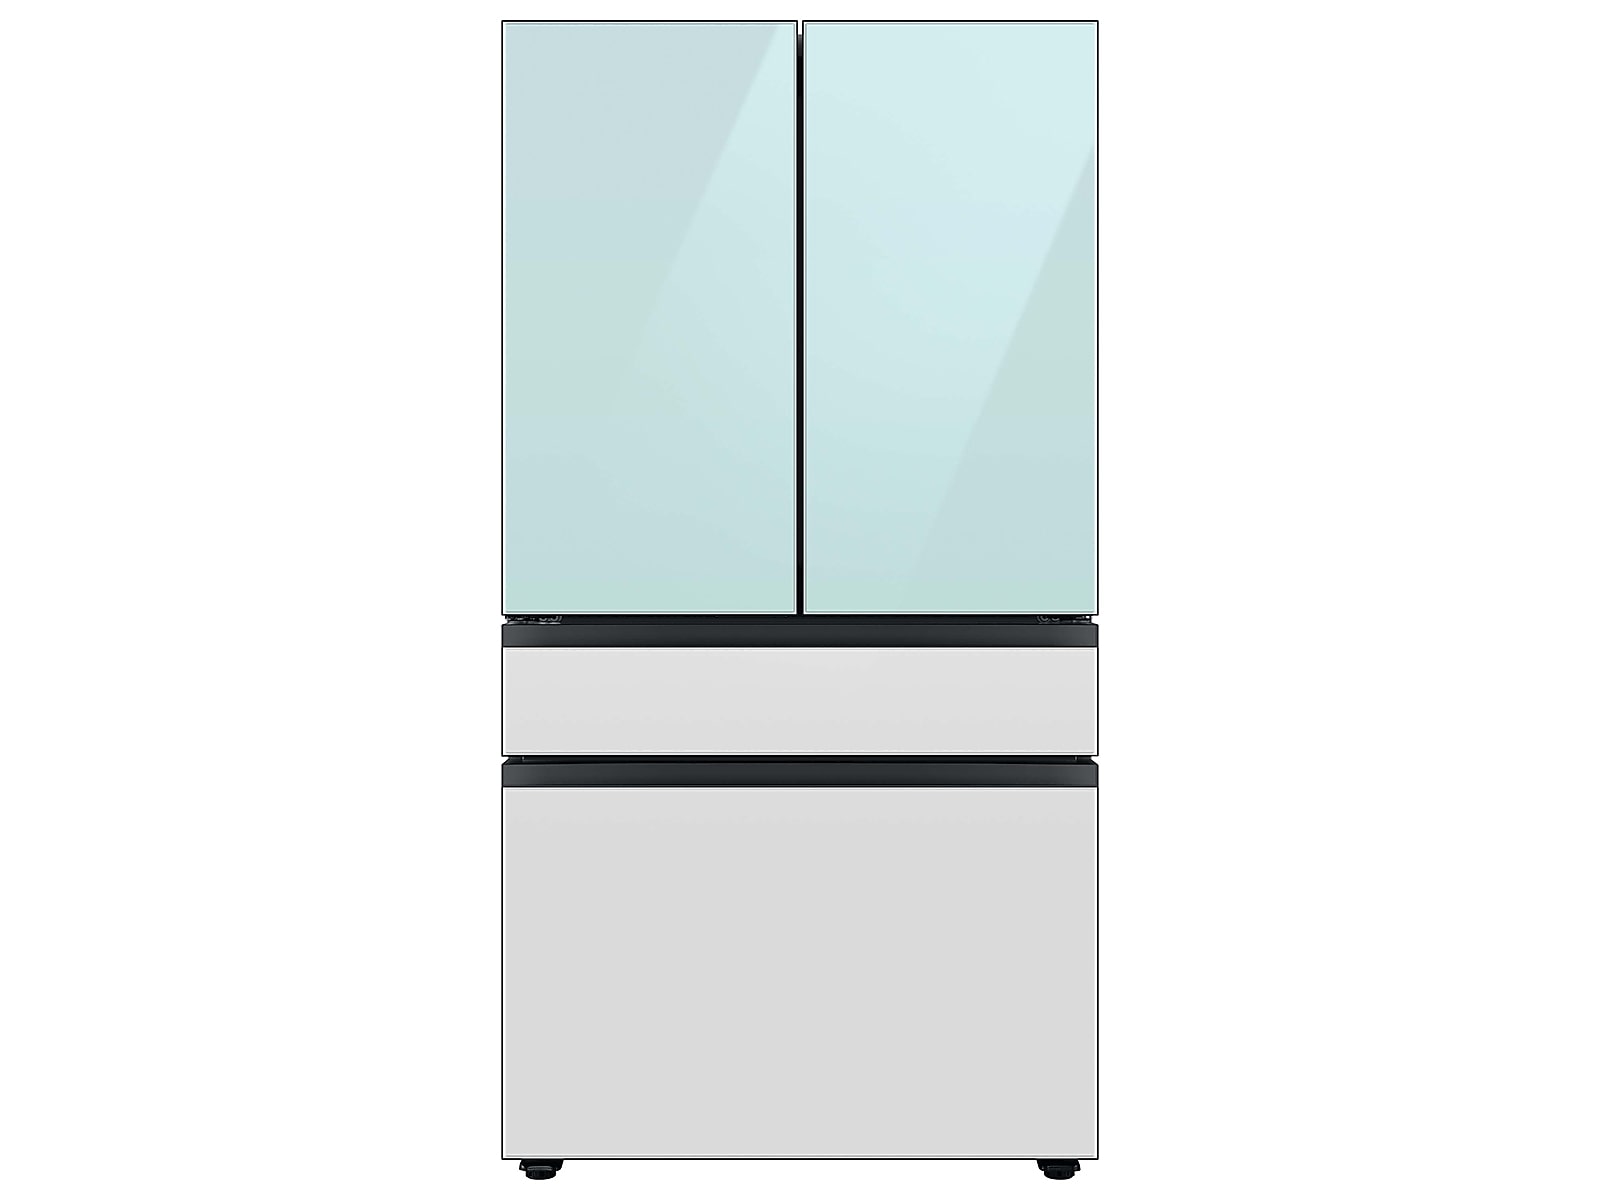 Samsung Bespoke 4-Door French Door Refrigerator in Morning Blue Glass Top/ White Glass Middle/ White Glass Bottom (29 cu. ft.) with Beverage Center™ in Morning Blue Glass Top Panels and White Glass Middle and Bottom Panels